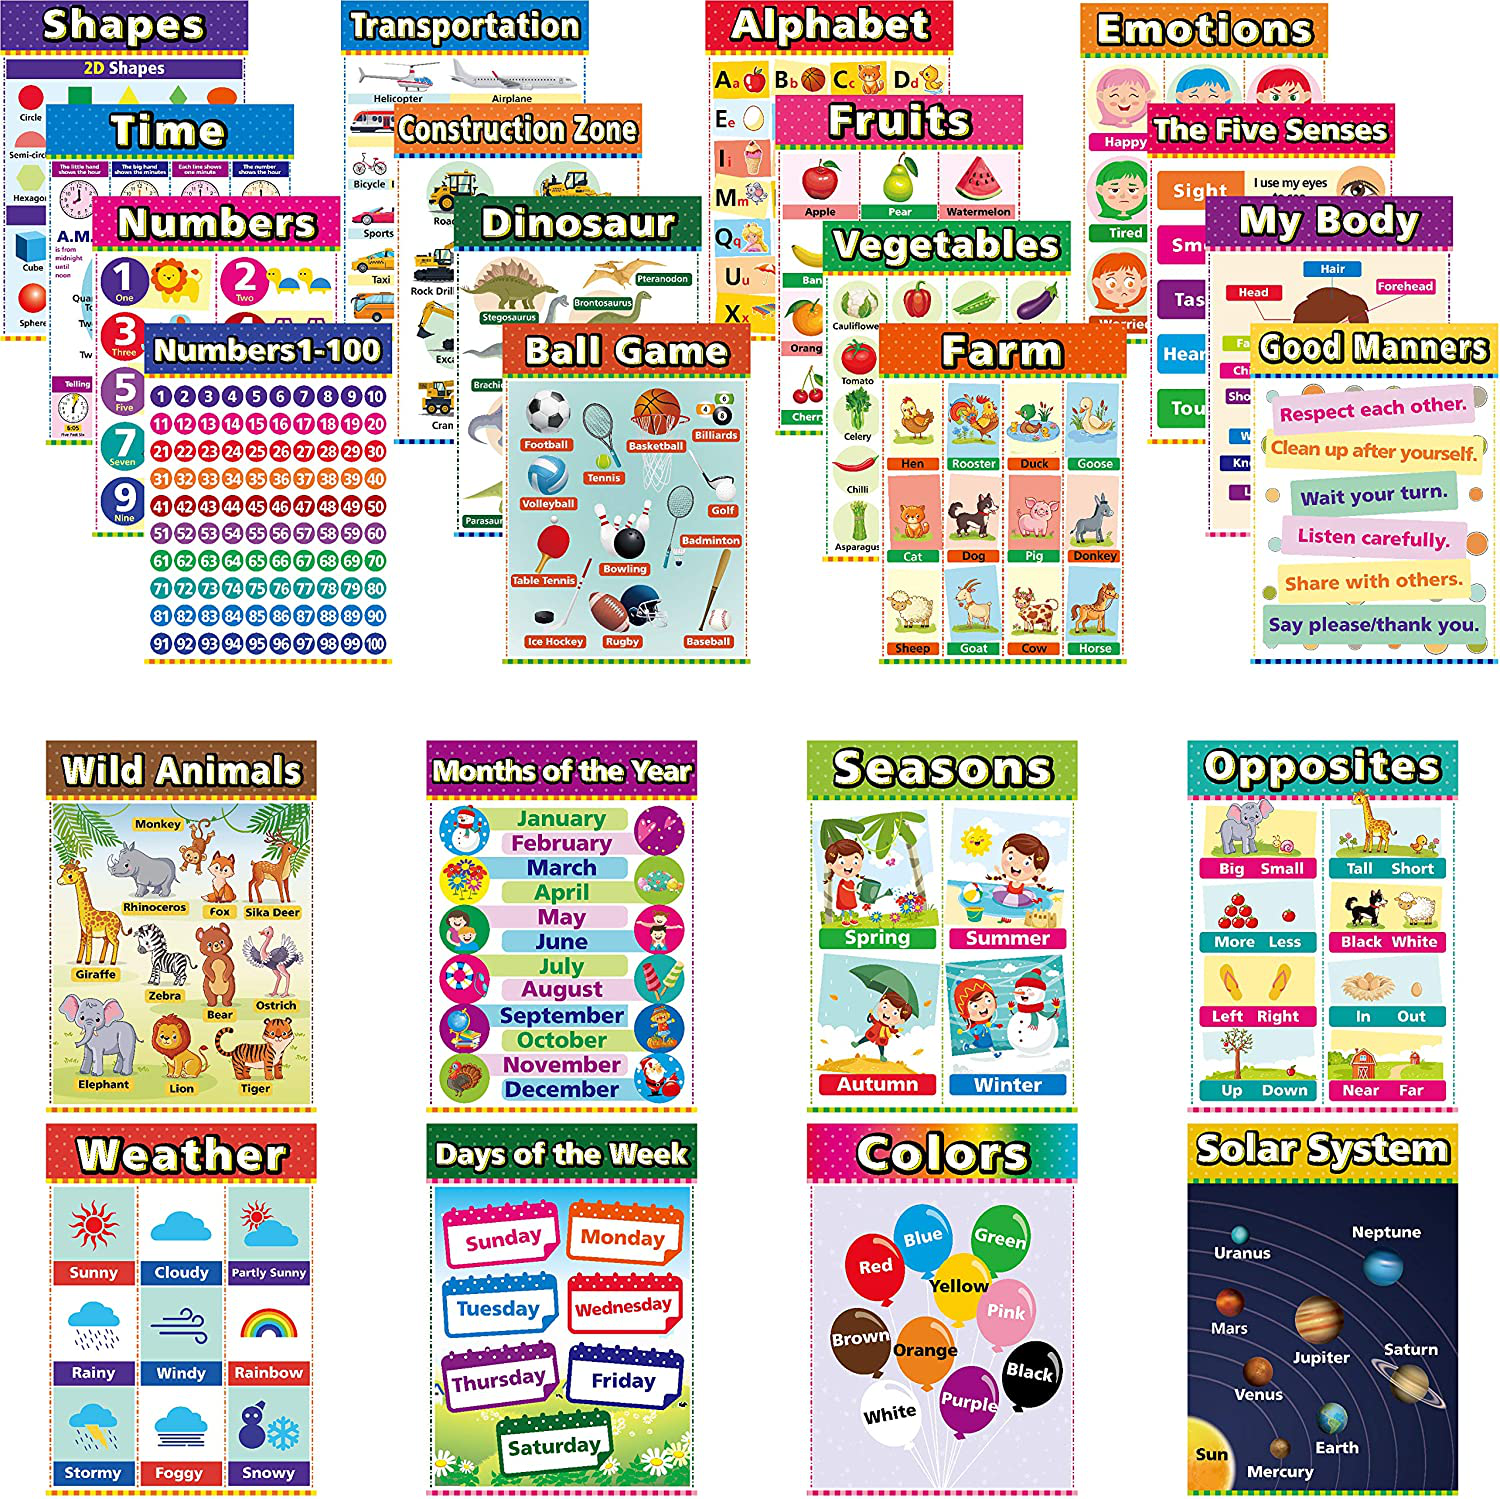 Preschool Poster for Toddlers Wall,Home Schooling Materials for Pre-k,Baby to 3rd Grade Kids,Kindergarten, Daycares, Classroom, Homeschool Teachers -Incl Fruit,Season,Alphabet,Colors, Shapes,and More (12pieces, English Style)